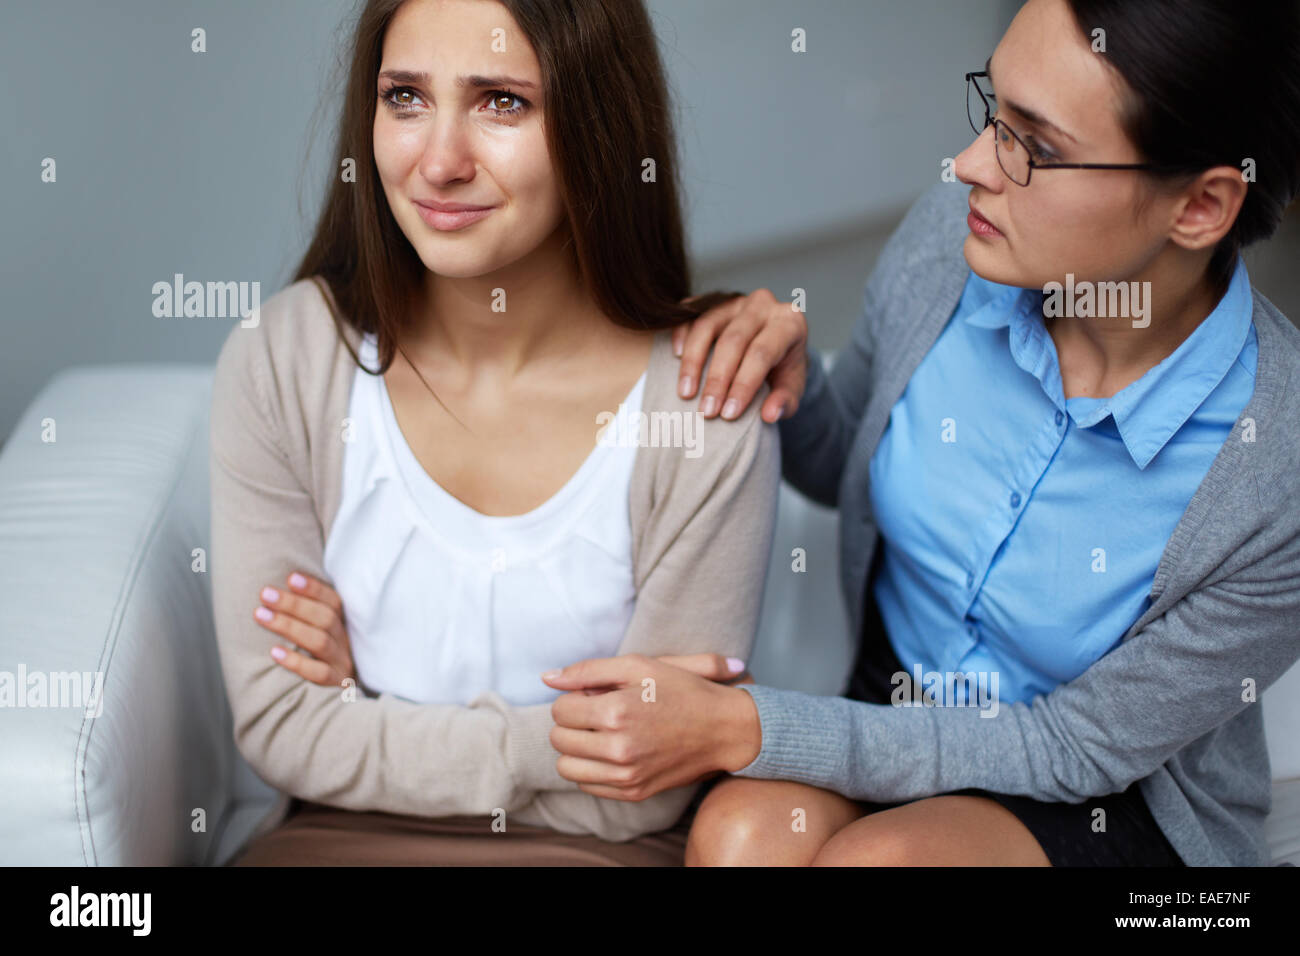 Female psychiatrist comforting young crying woman Stock Photo